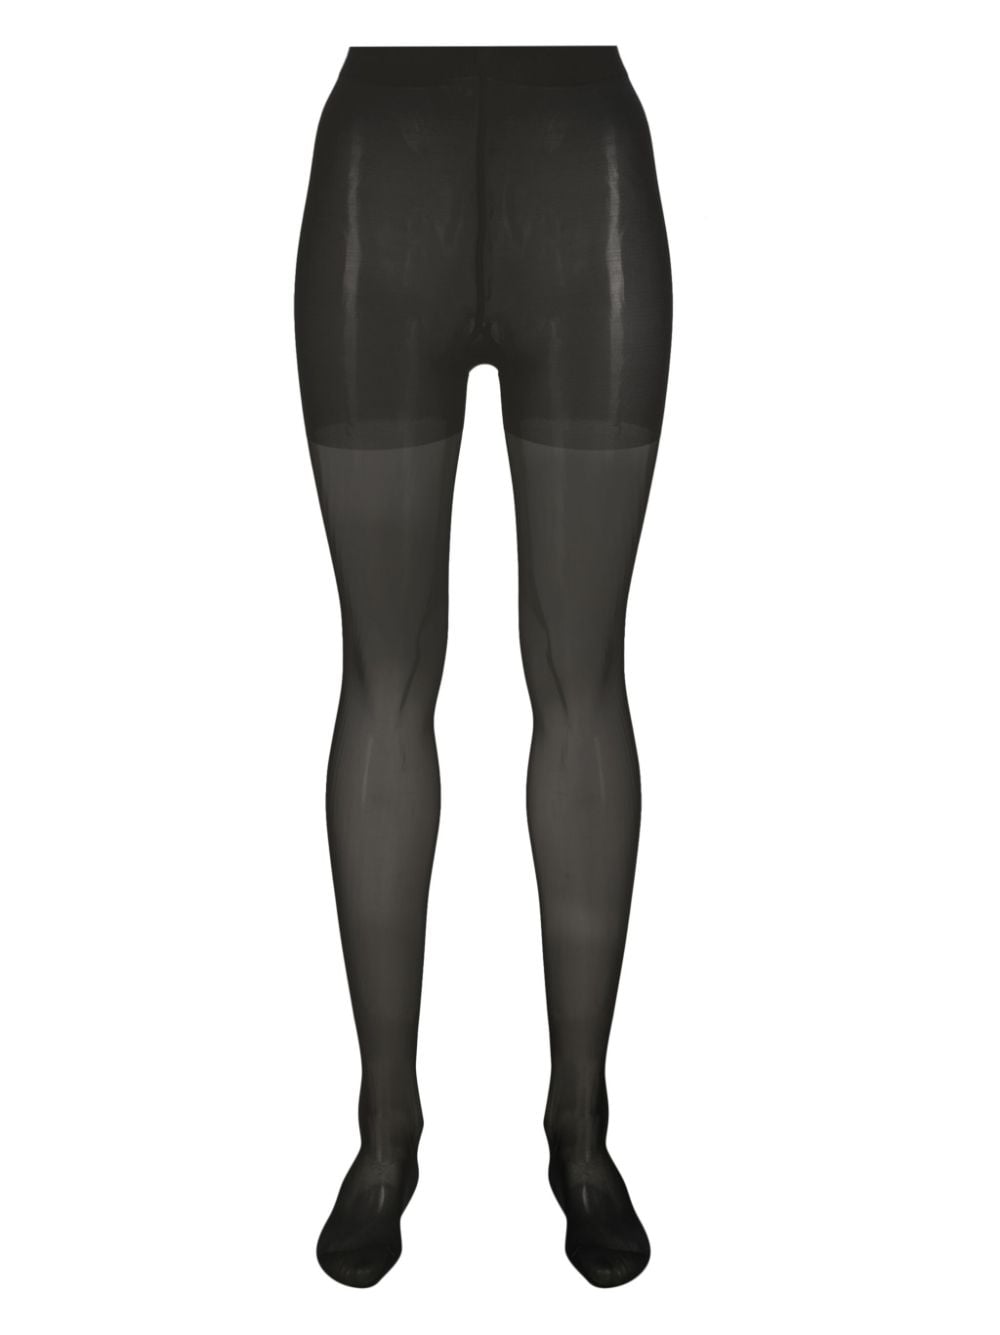 Wolford Individual 10 Control Top sheer tights - Black von Wolford